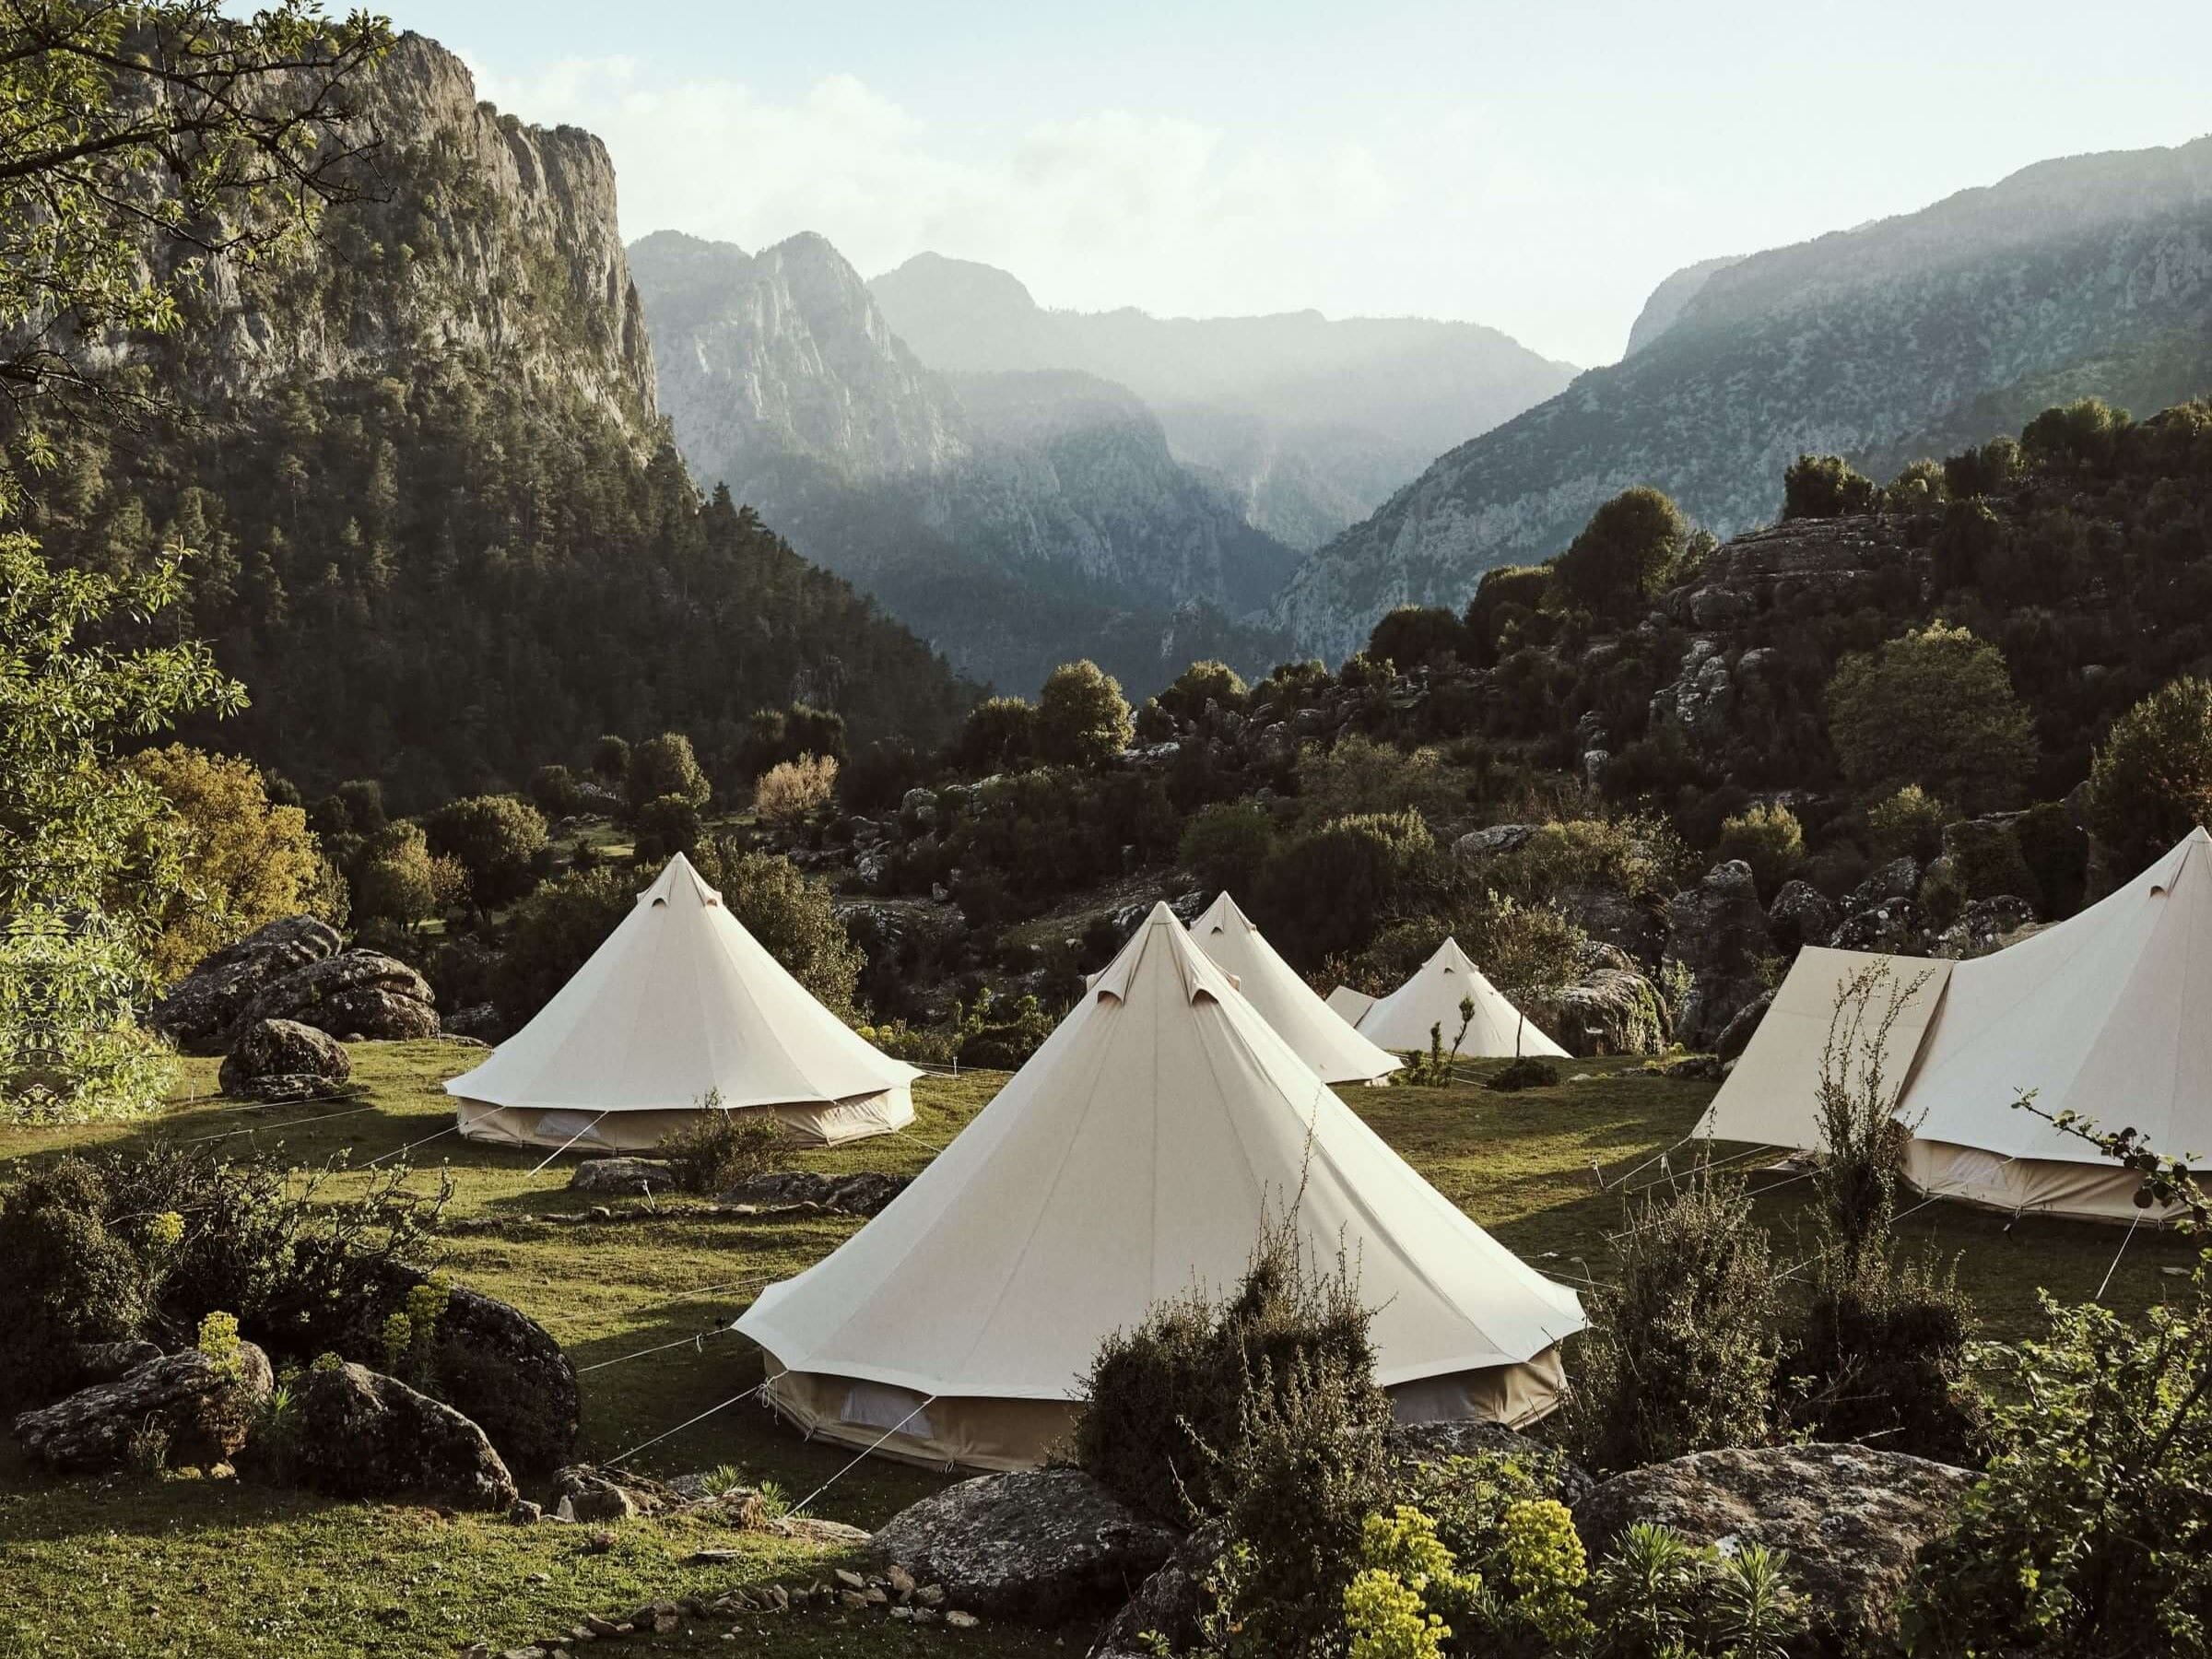 The Slow Cyclist's luxury tented camp in the Taurus Mountains